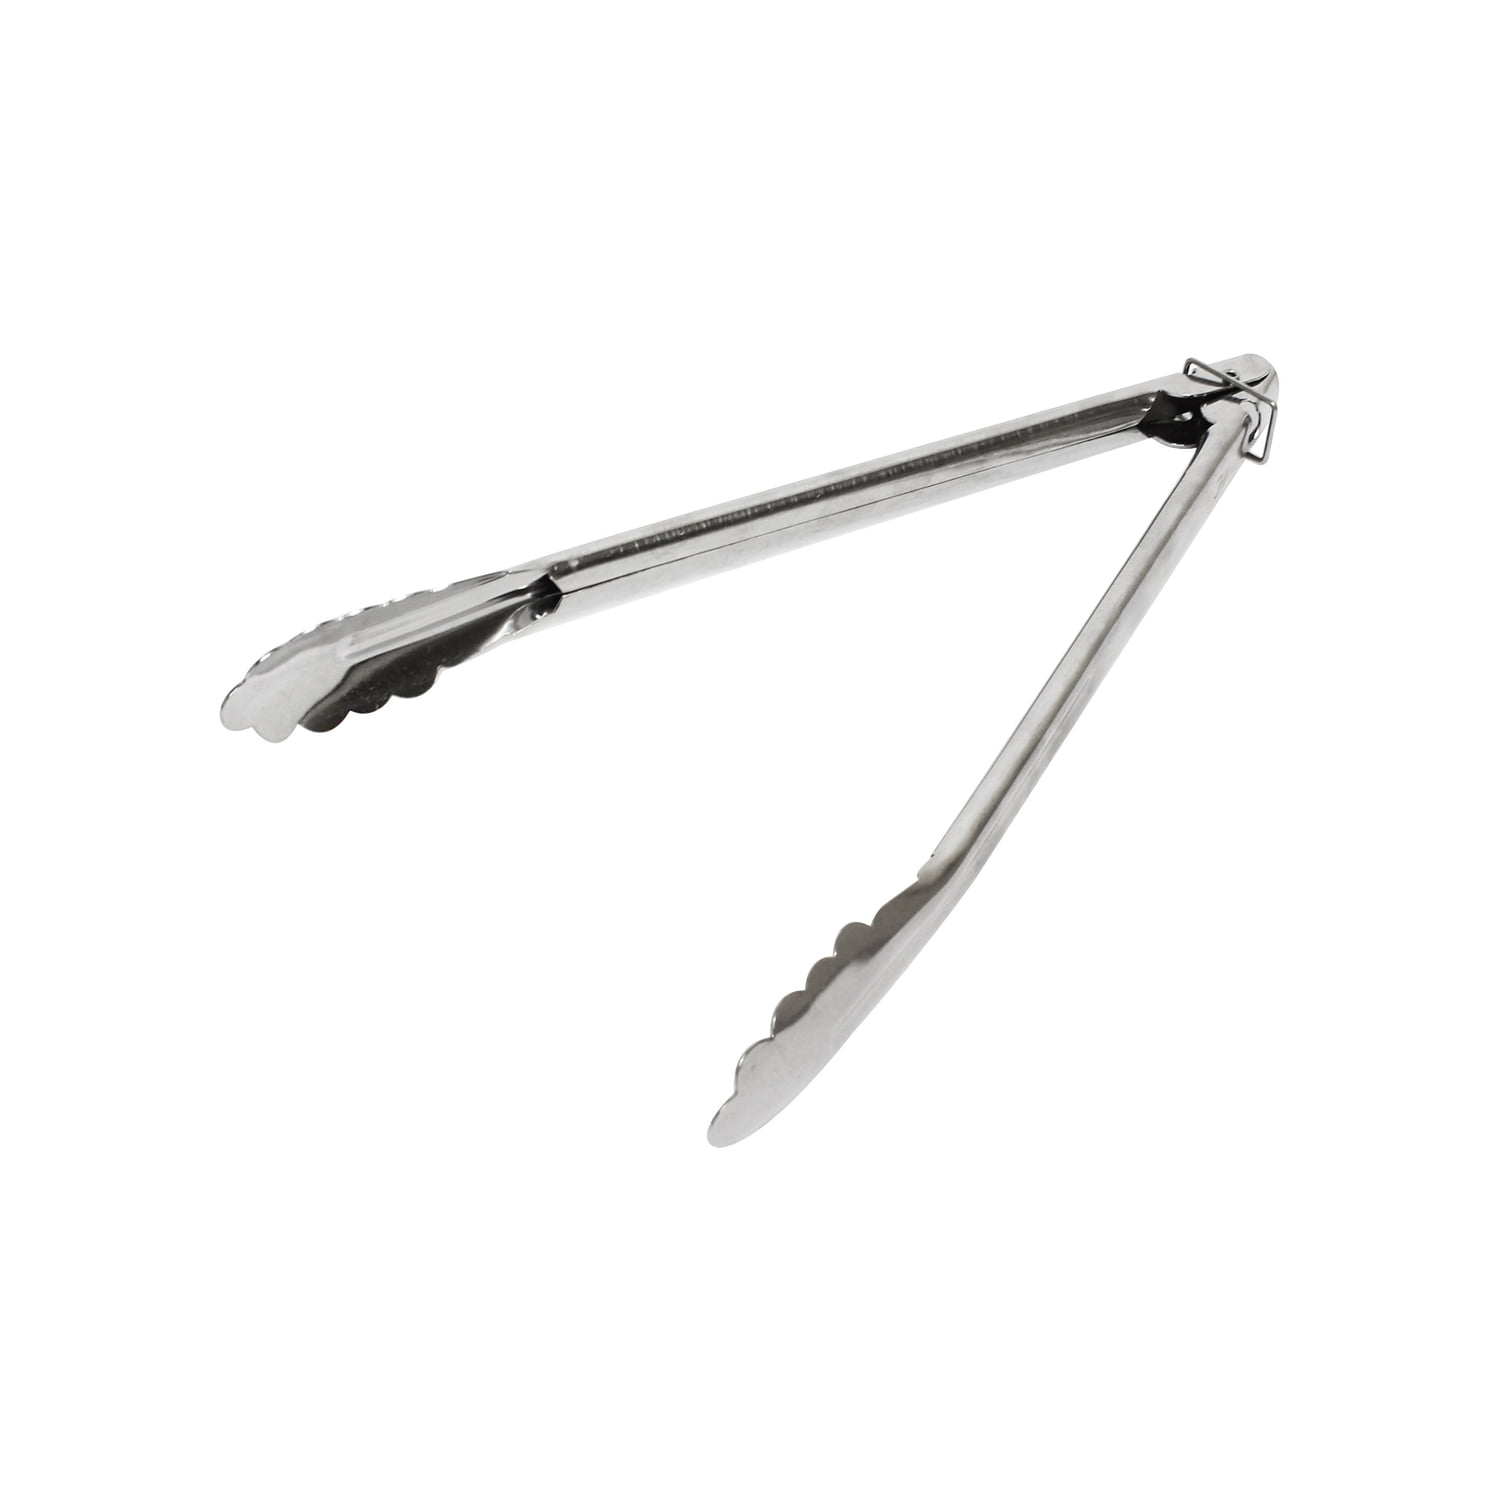 Choice 7 Heavy-Duty Stainless Steel Utility Tongs